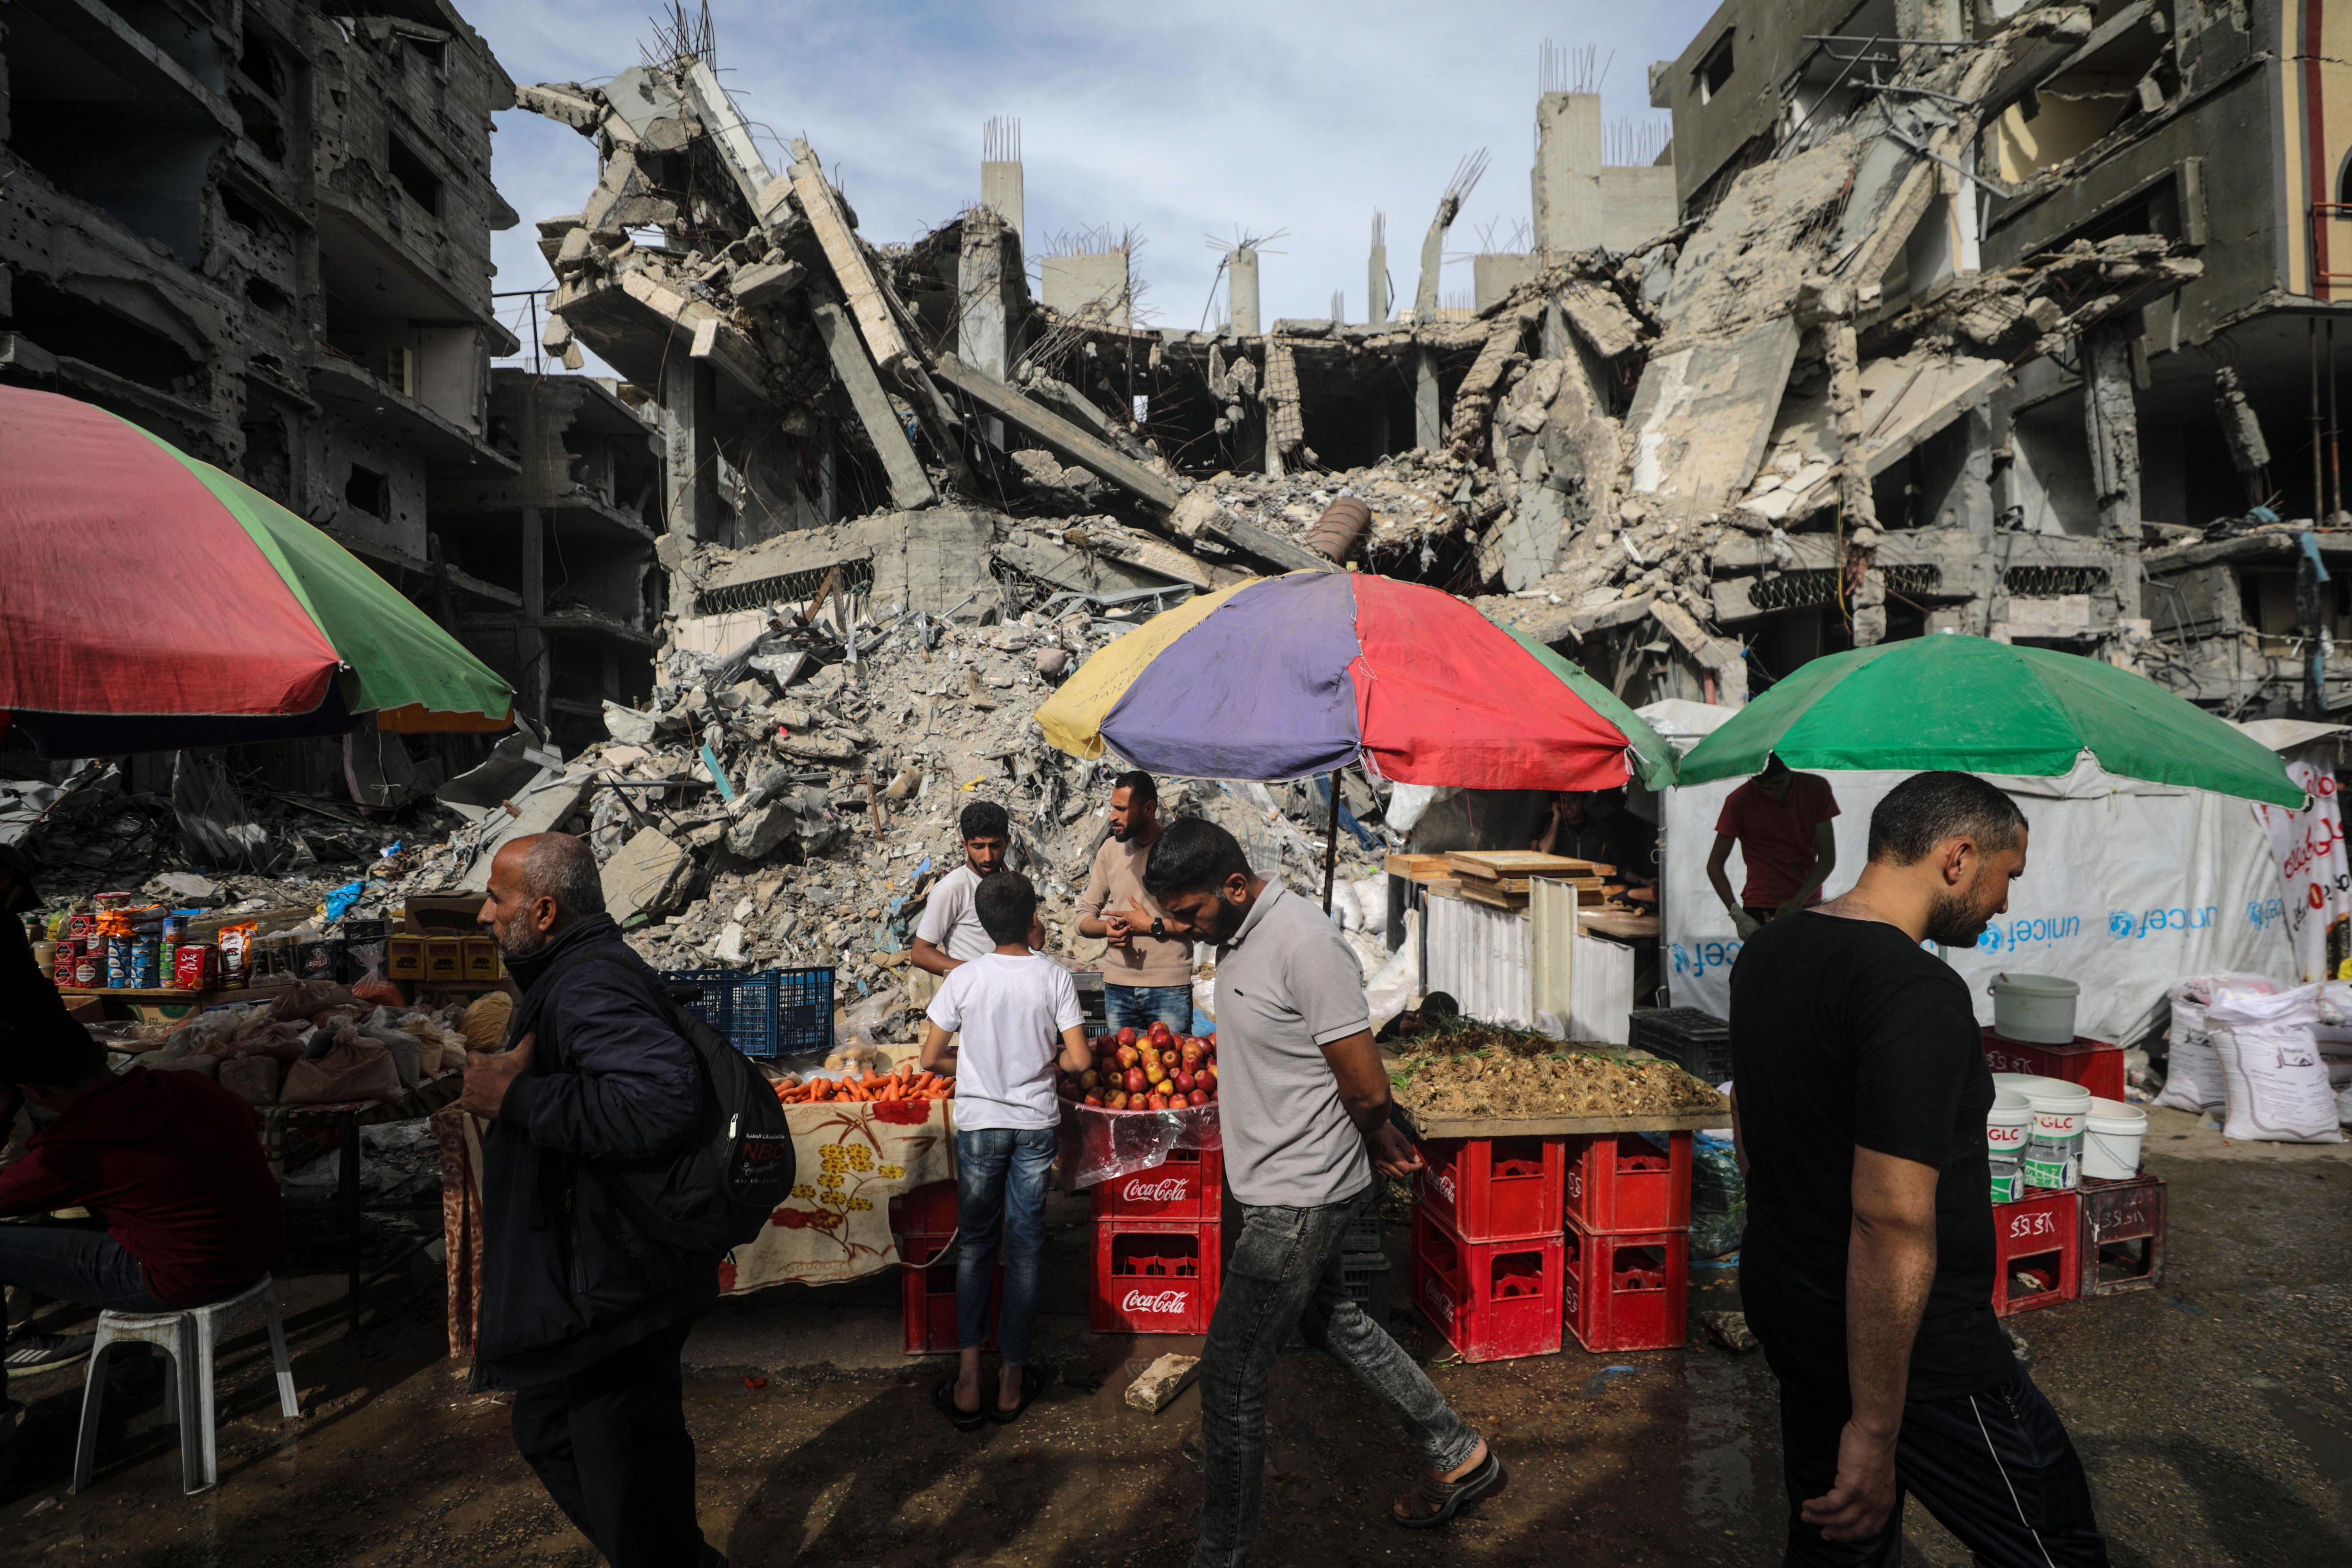 Palestinian men walk past kiosks set up next to buildings of the Nuseirat refugee camp in the Gaza Strip, on April 5, the last Friday of Ramadan.